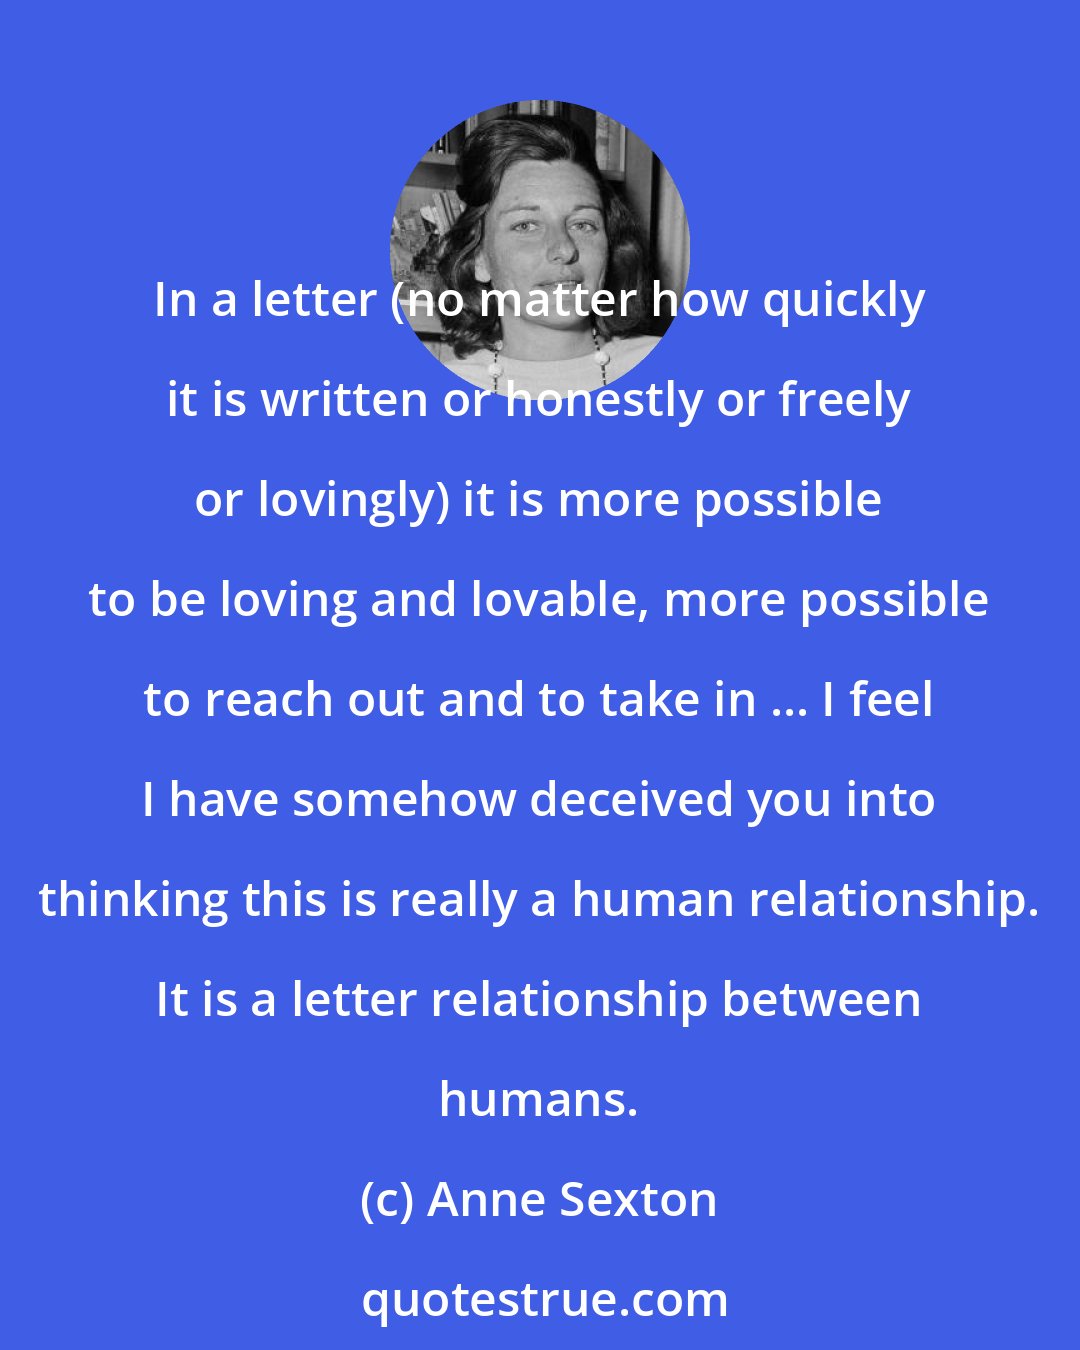 Anne Sexton: In a letter (no matter how quickly it is written or honestly or freely or lovingly) it is more possible to be loving and lovable, more possible to reach out and to take in ... I feel I have somehow deceived you into thinking this is really a human relationship. It is a letter relationship between humans.